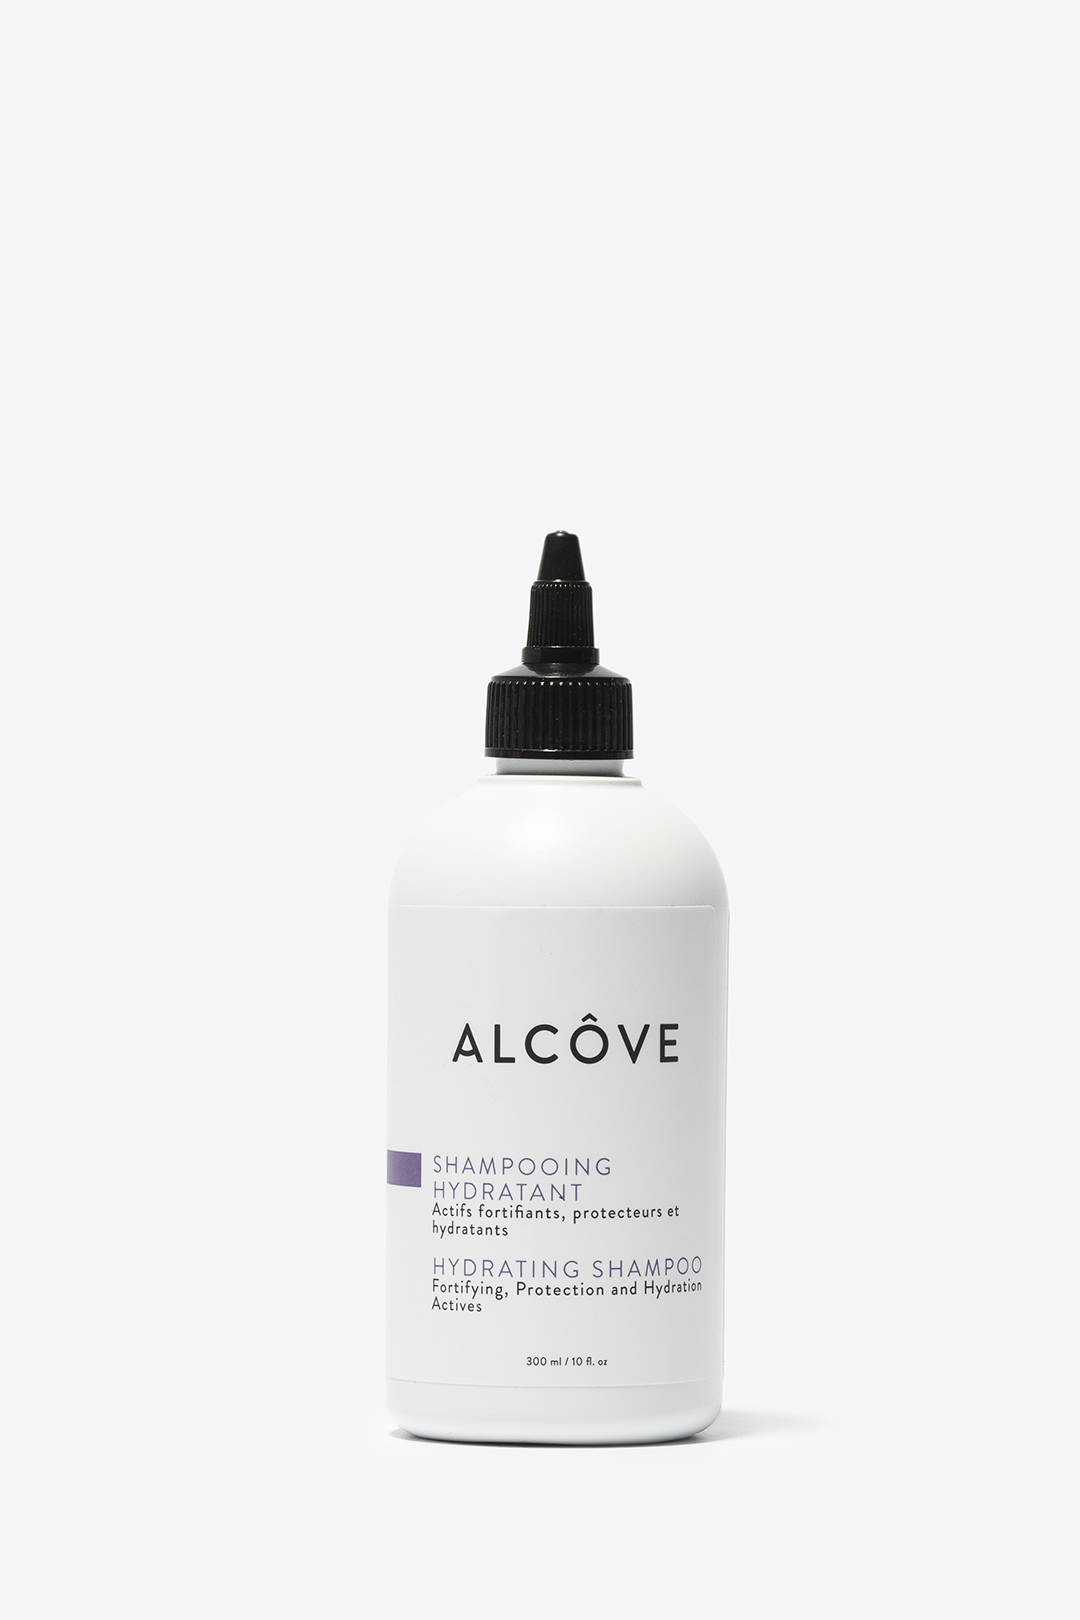 Alcove - hydrating shampoo - 300 ml - by Alcove |ProCare Outlet|